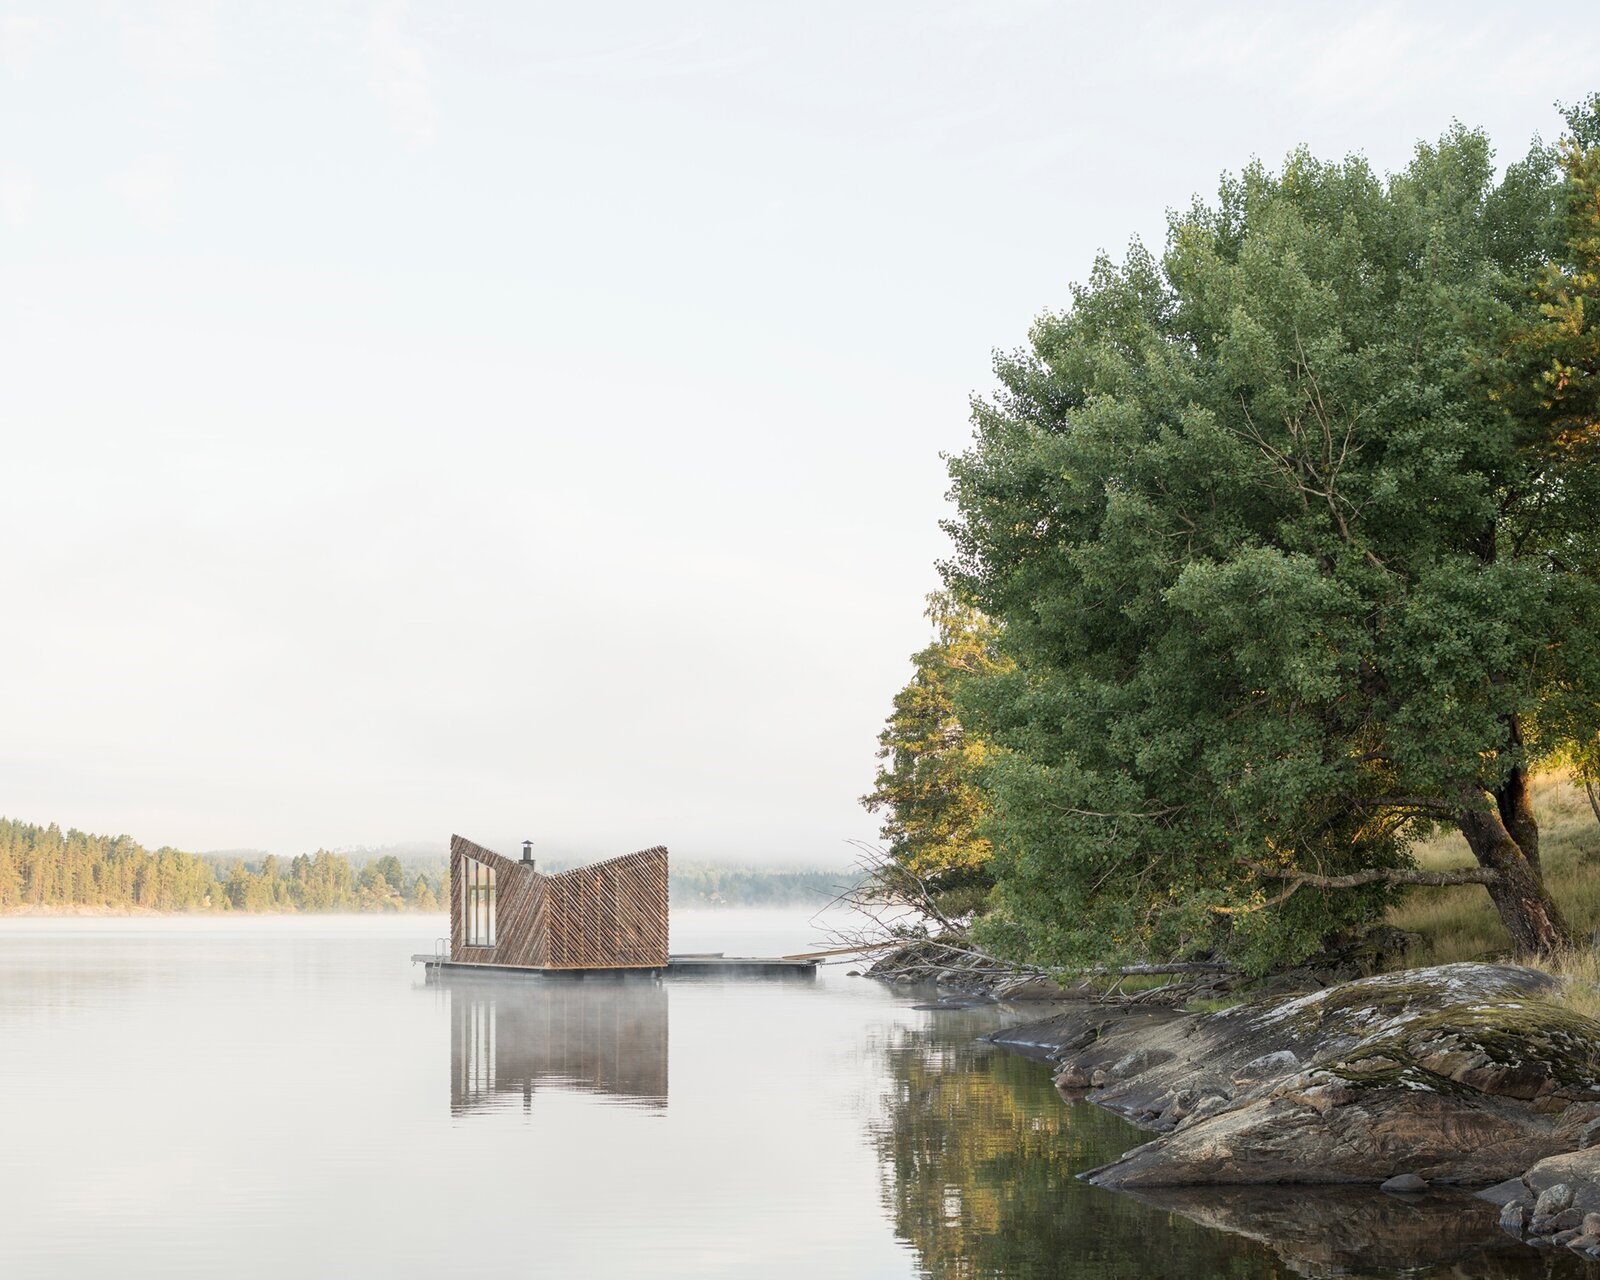 You Can Rent This Floating Cabin That Cruises the Waterways of the Norwegian Wilderness